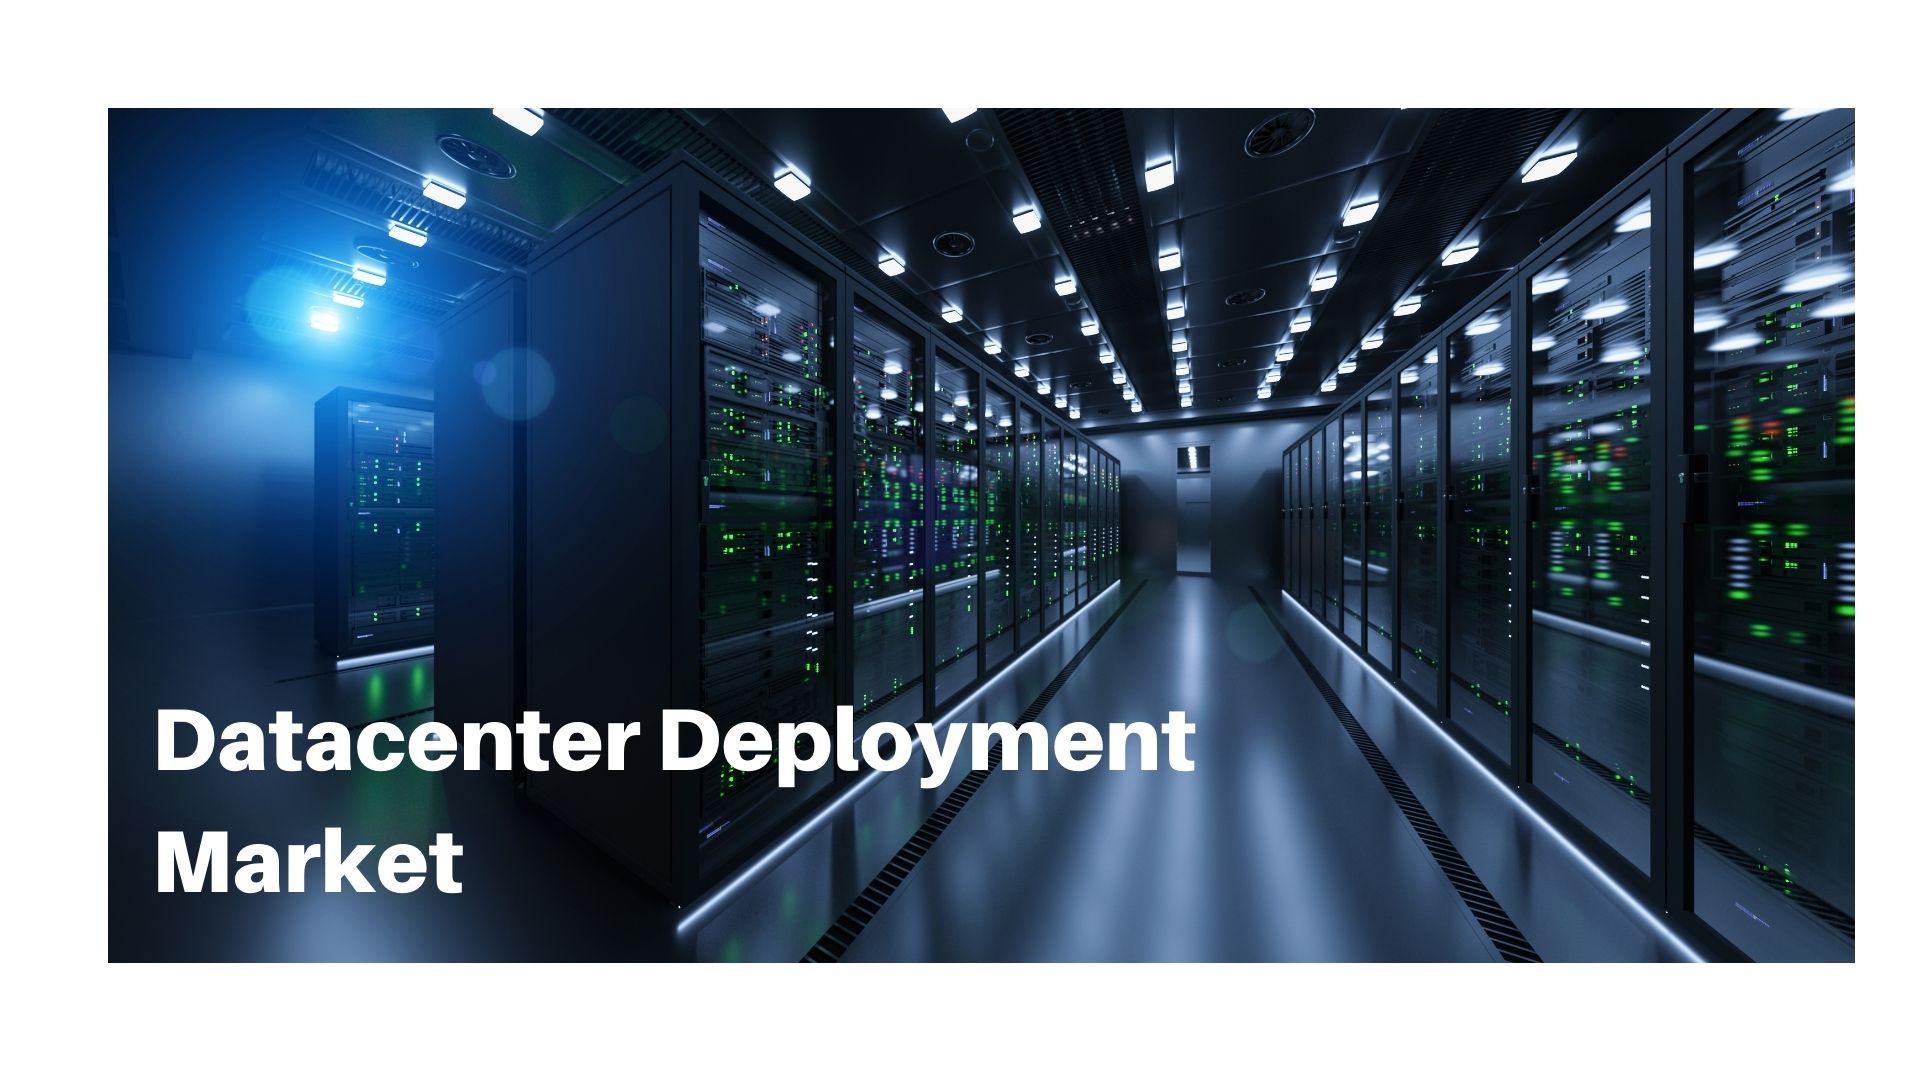 Datacenter Deployment Spending Market Is Predicted To Reach USD 303 Bn By 2032